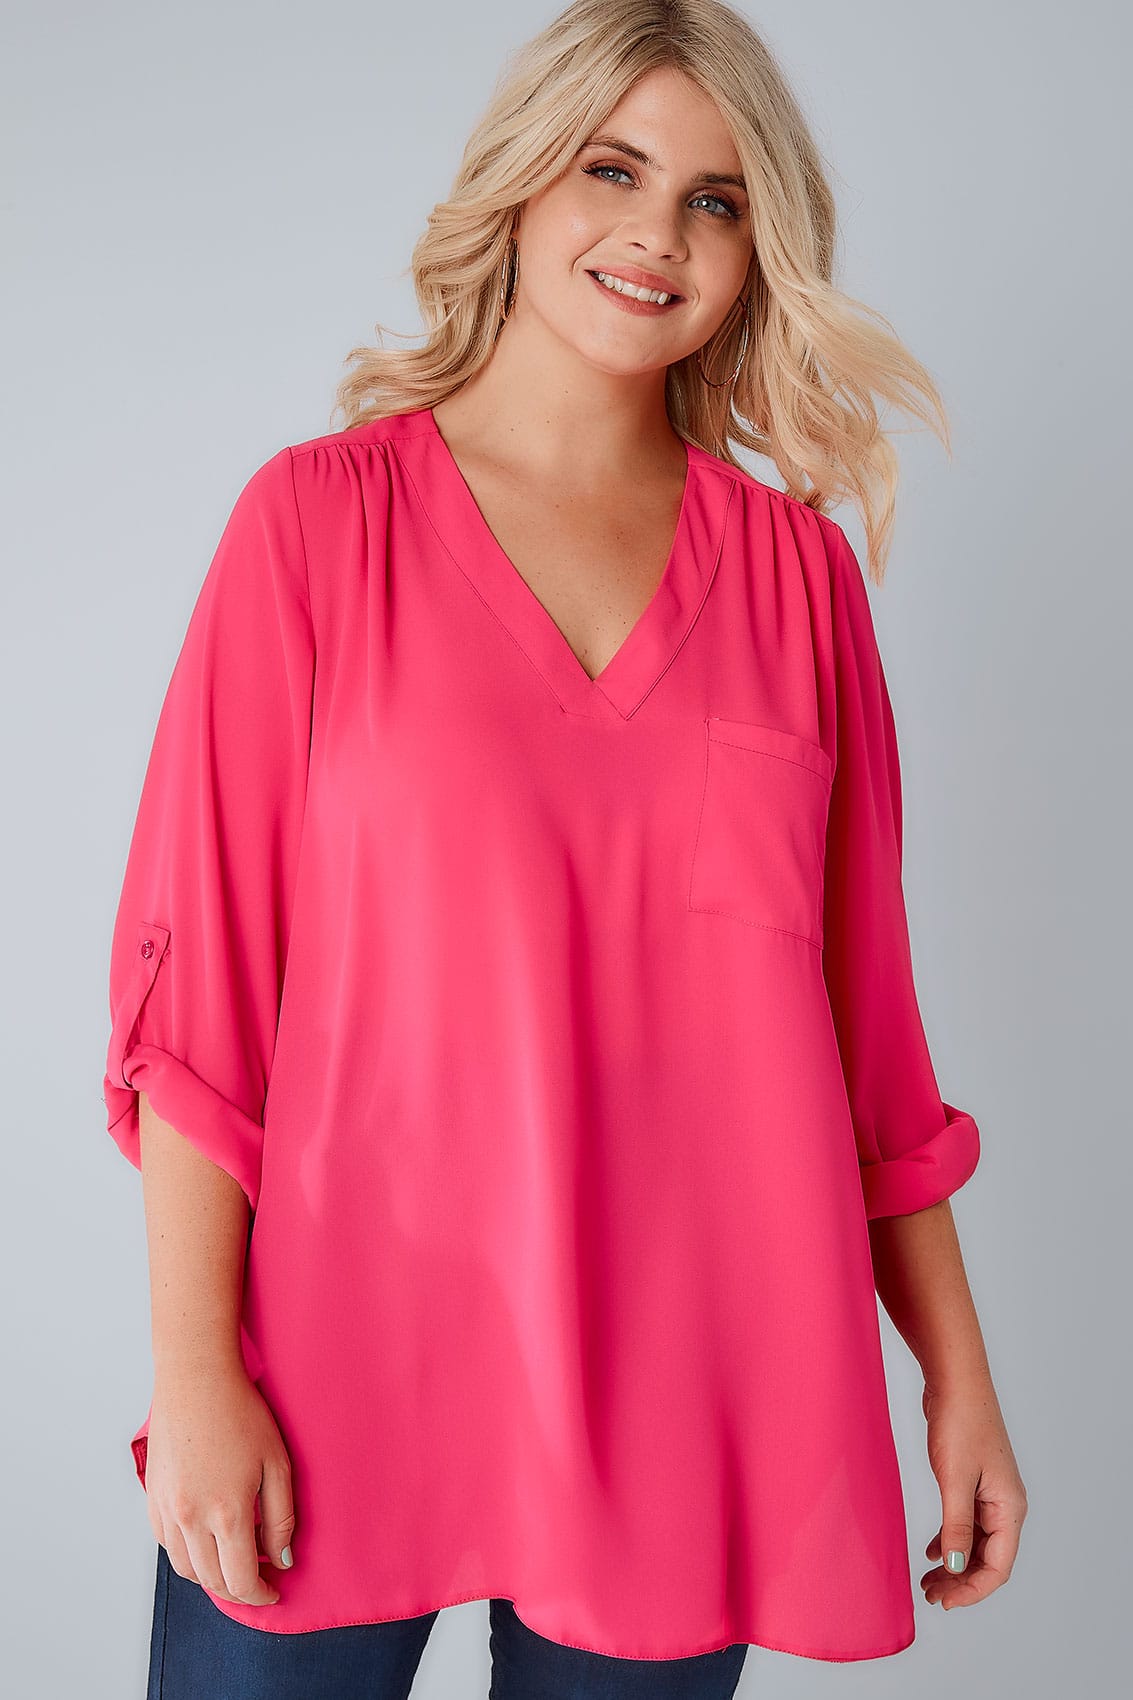 Magenta Pink Woven V Neck Blouse With Pocket Plus Size 16 To 32